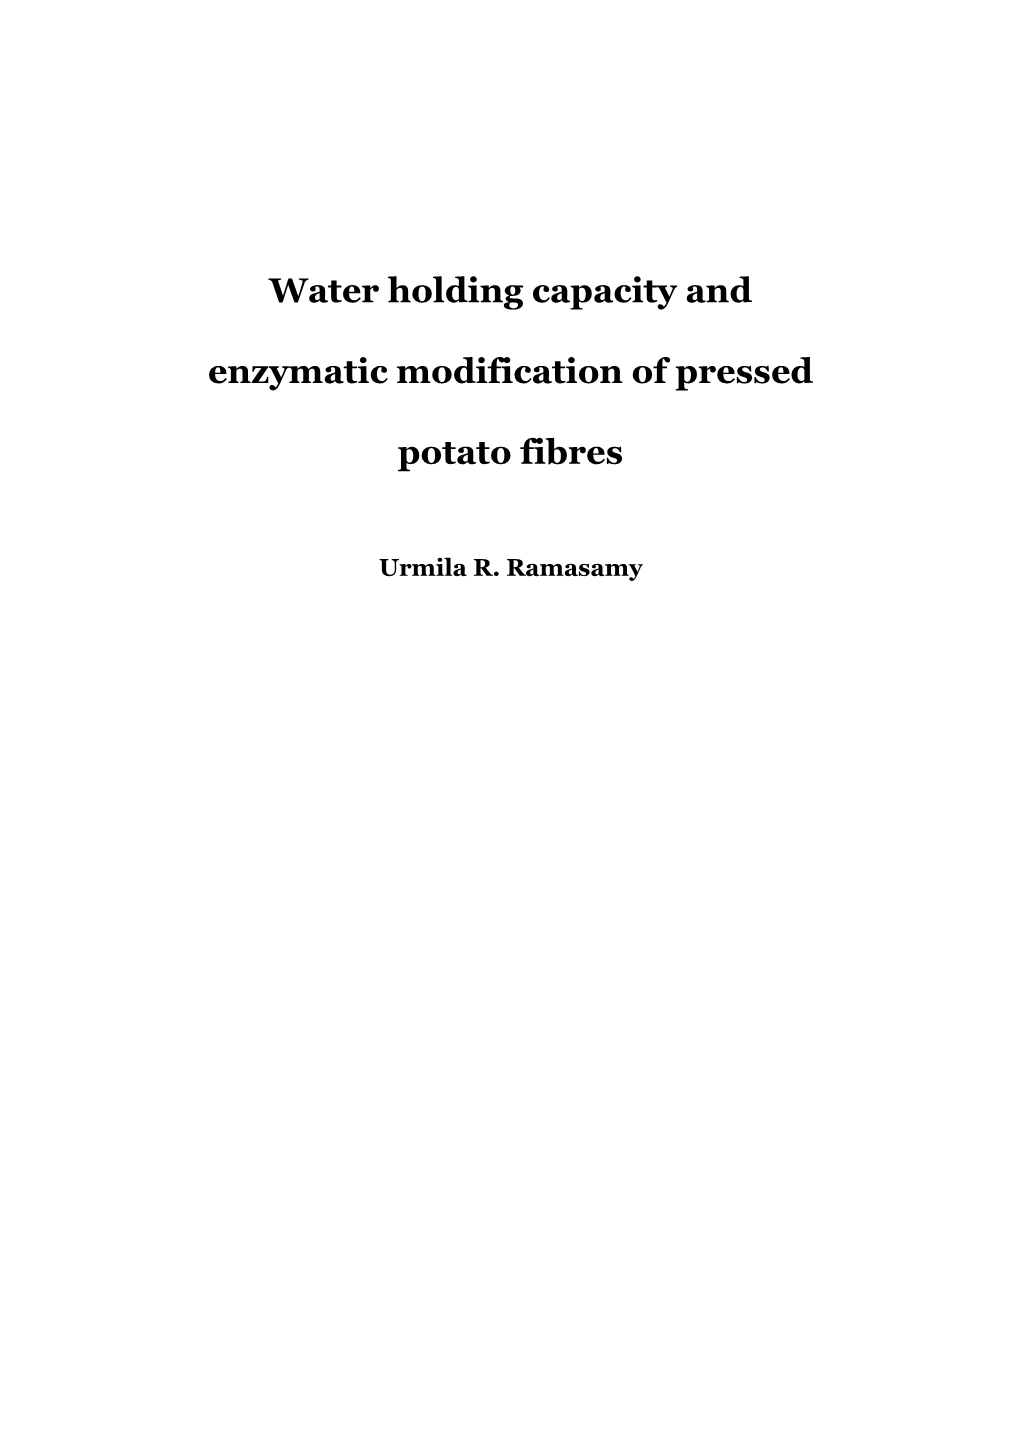 Water Holding Capacity and Enzymatic Modification of Pressed Potato Fibres 164 Pages